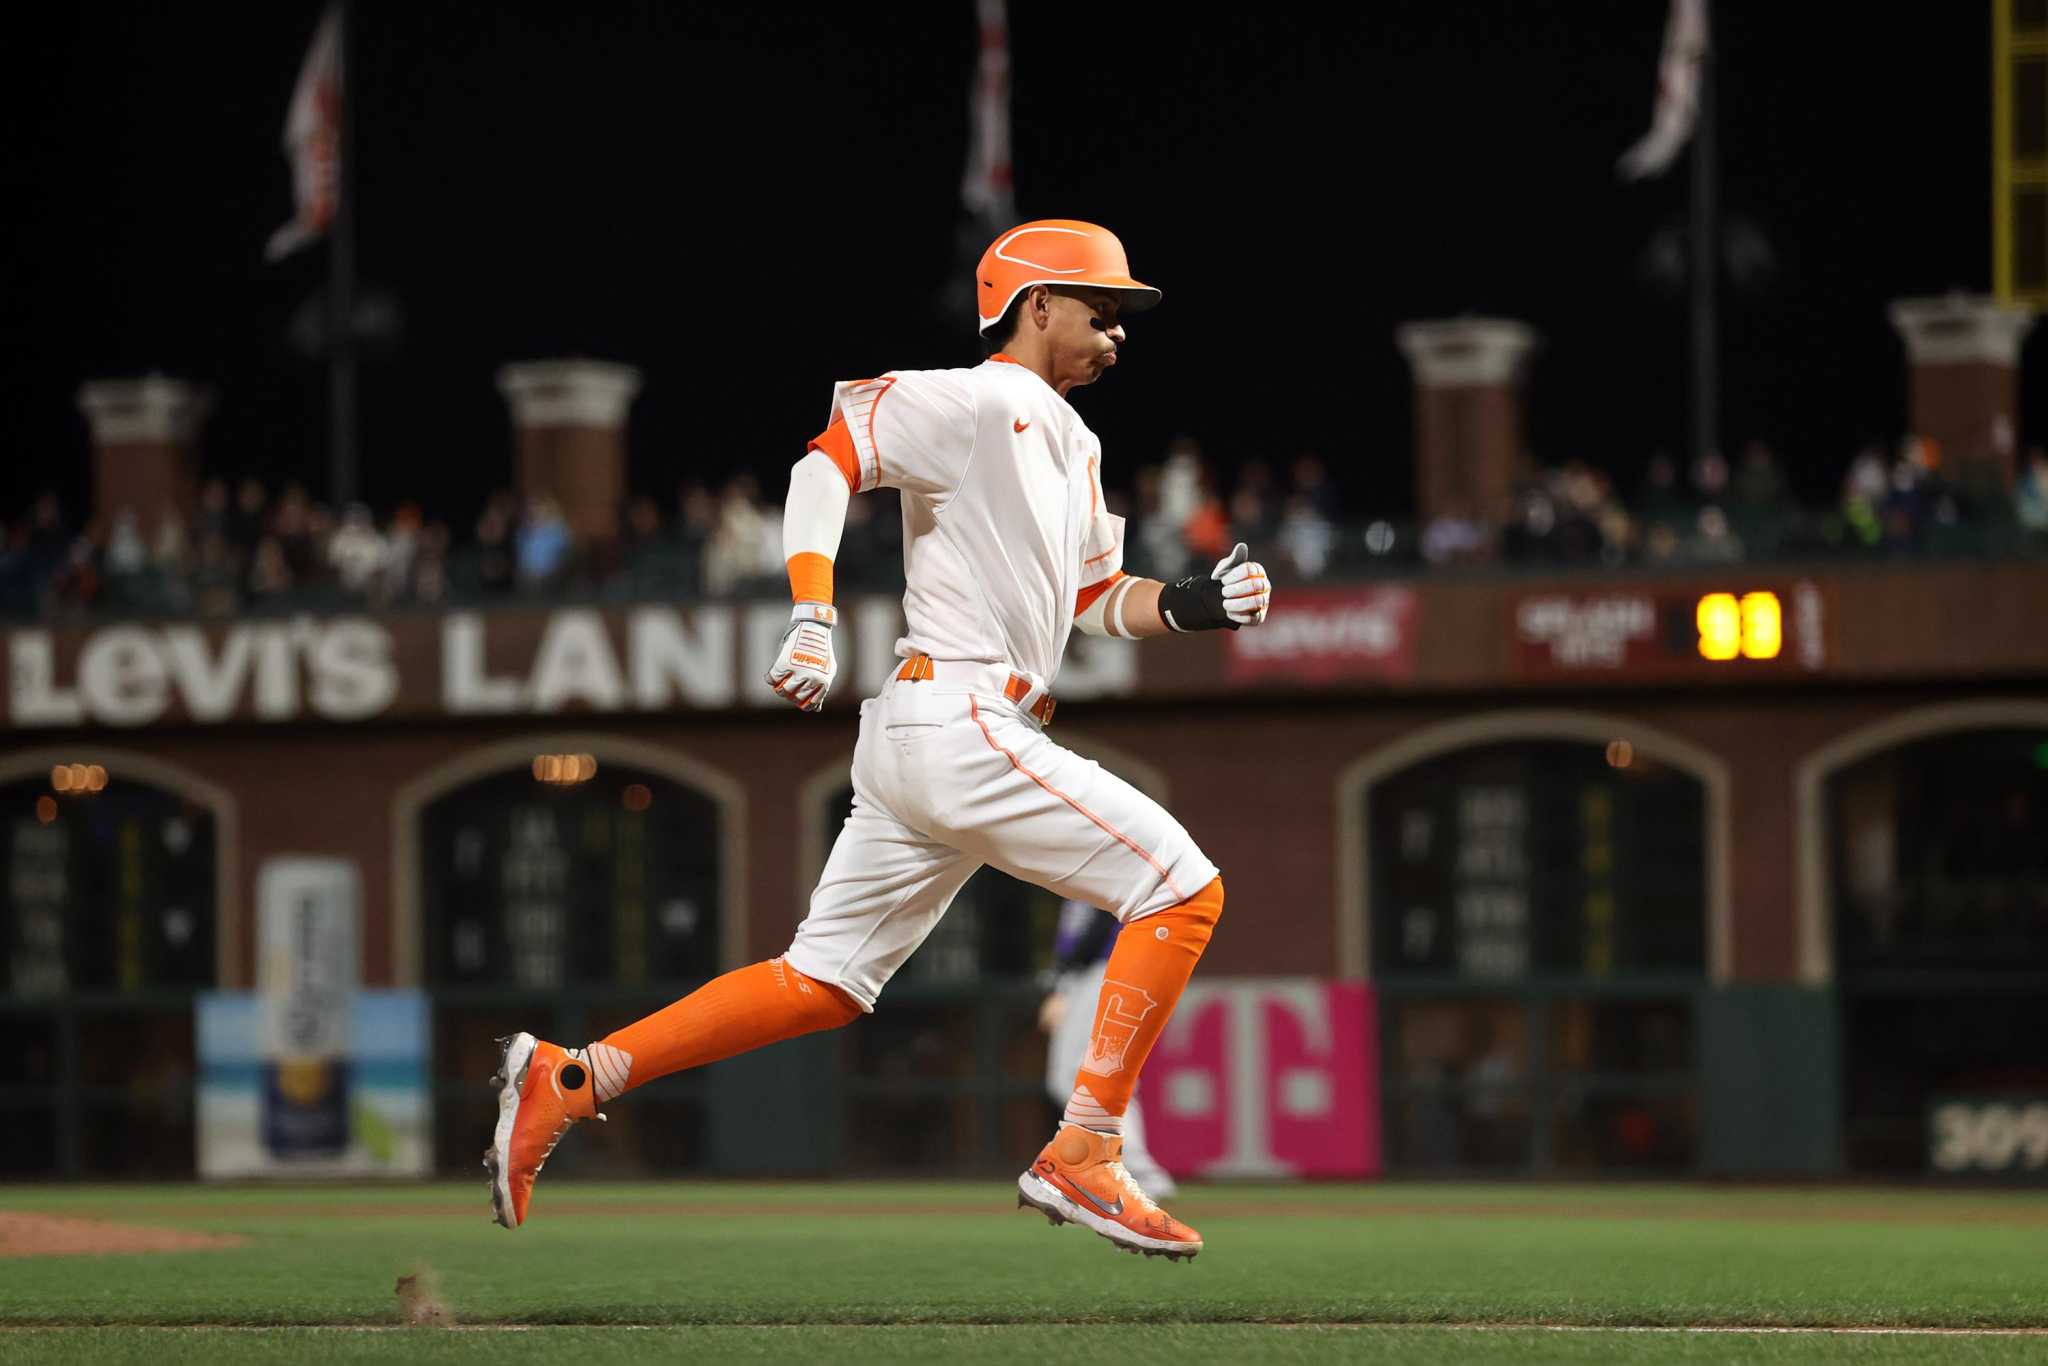 LaMonte Wade's walk-off lifts SF Giants to 5-4 win over Guardians - Sports  Illustrated San Francisco Giants News, Analysis and More